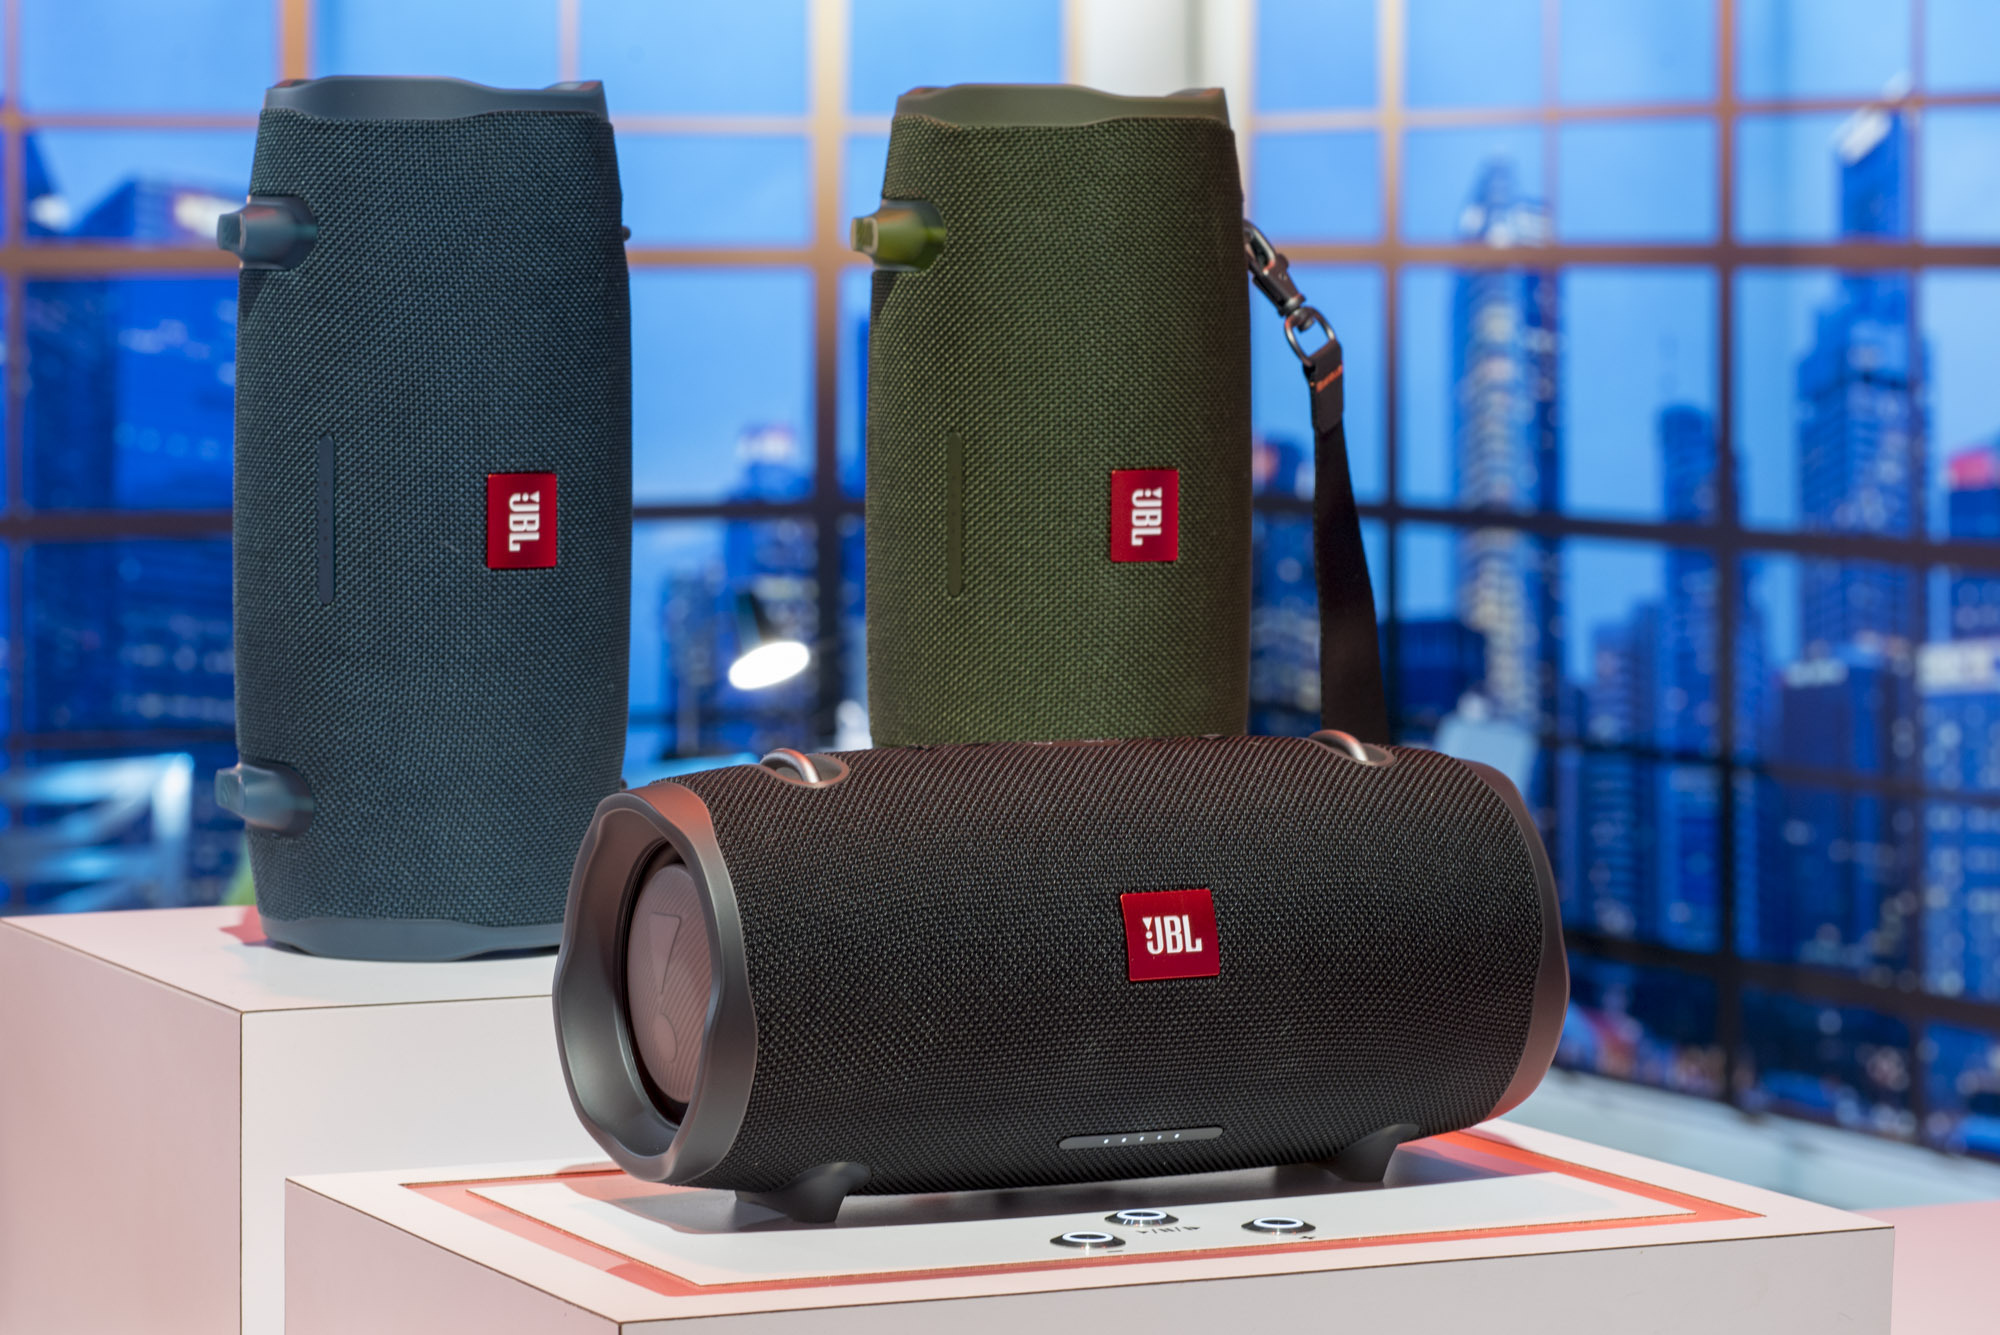 JBL® Xtreme 2 Makes with its Powerful Audio Performance and Durable, Fully Waterproof Design | Business Wire